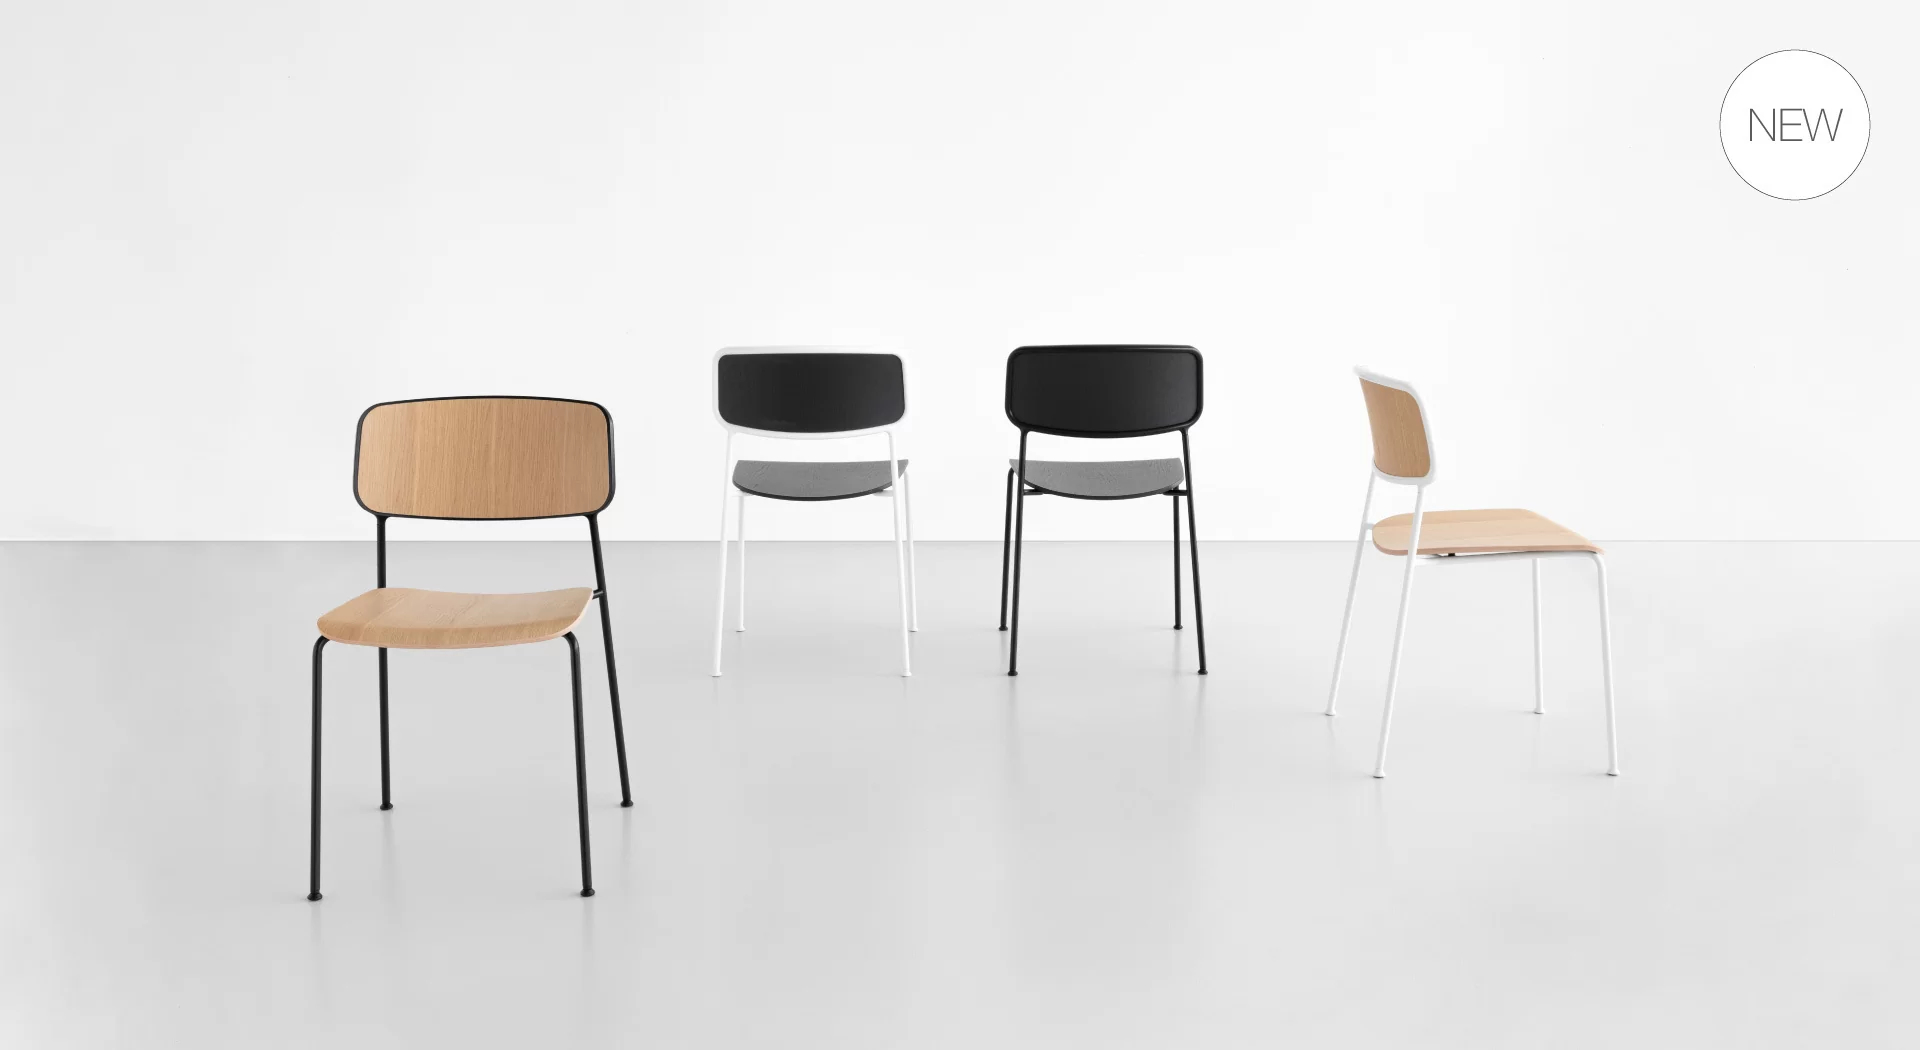 la palma Kisat chair seating collection by Hee Welling